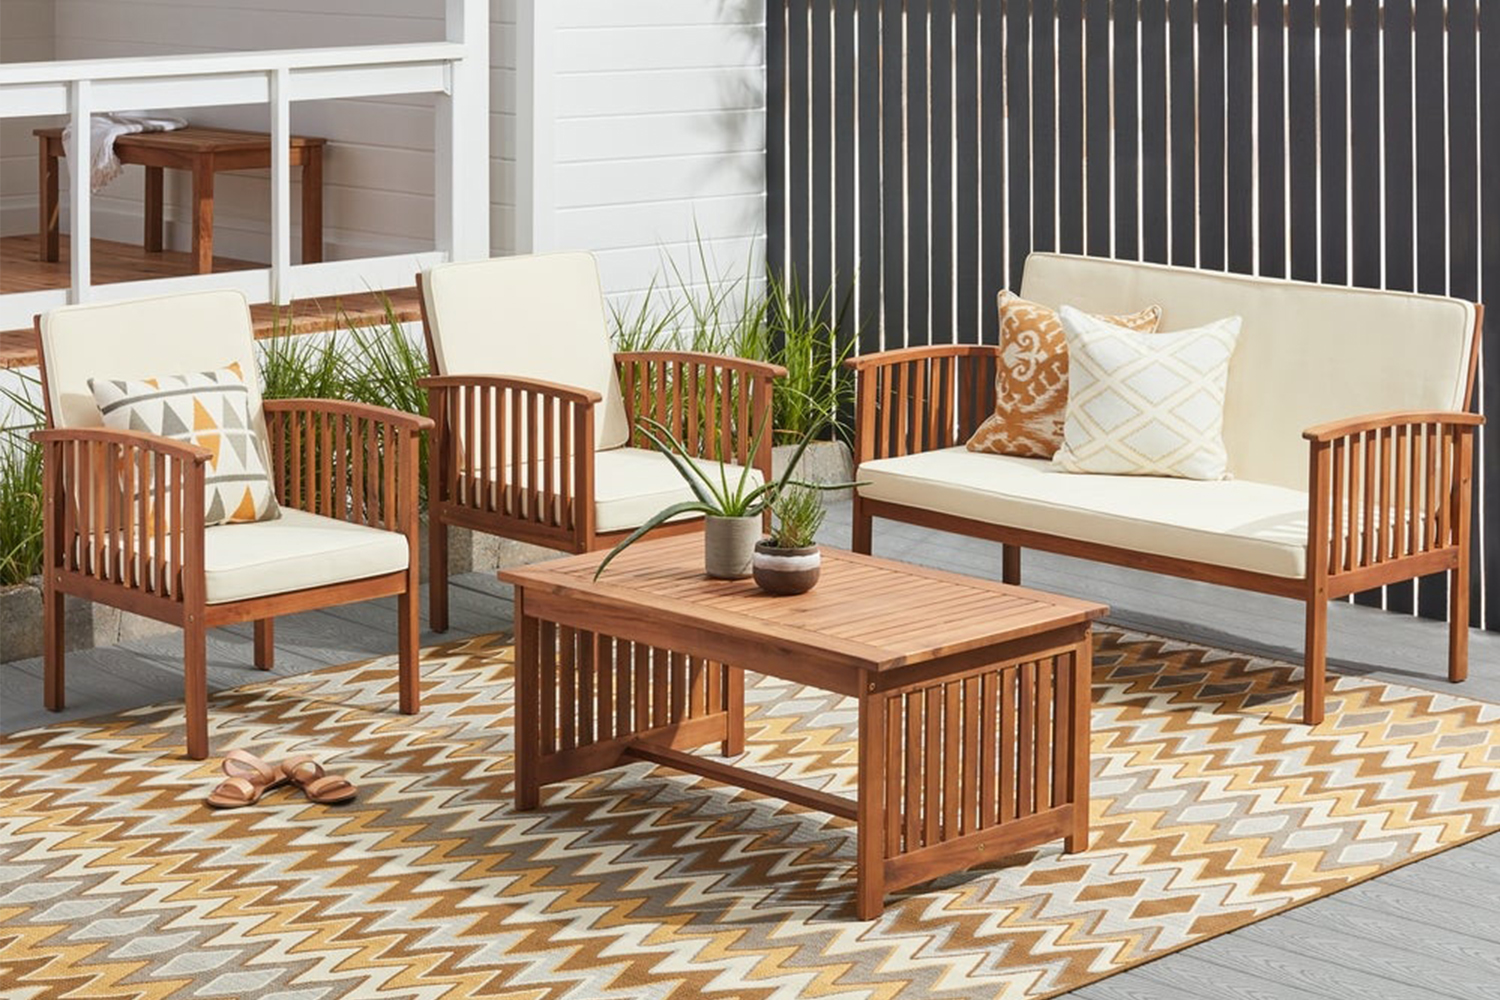 Best Patio Furniture at Overstock's Spring Black Friday Sale InsideHook